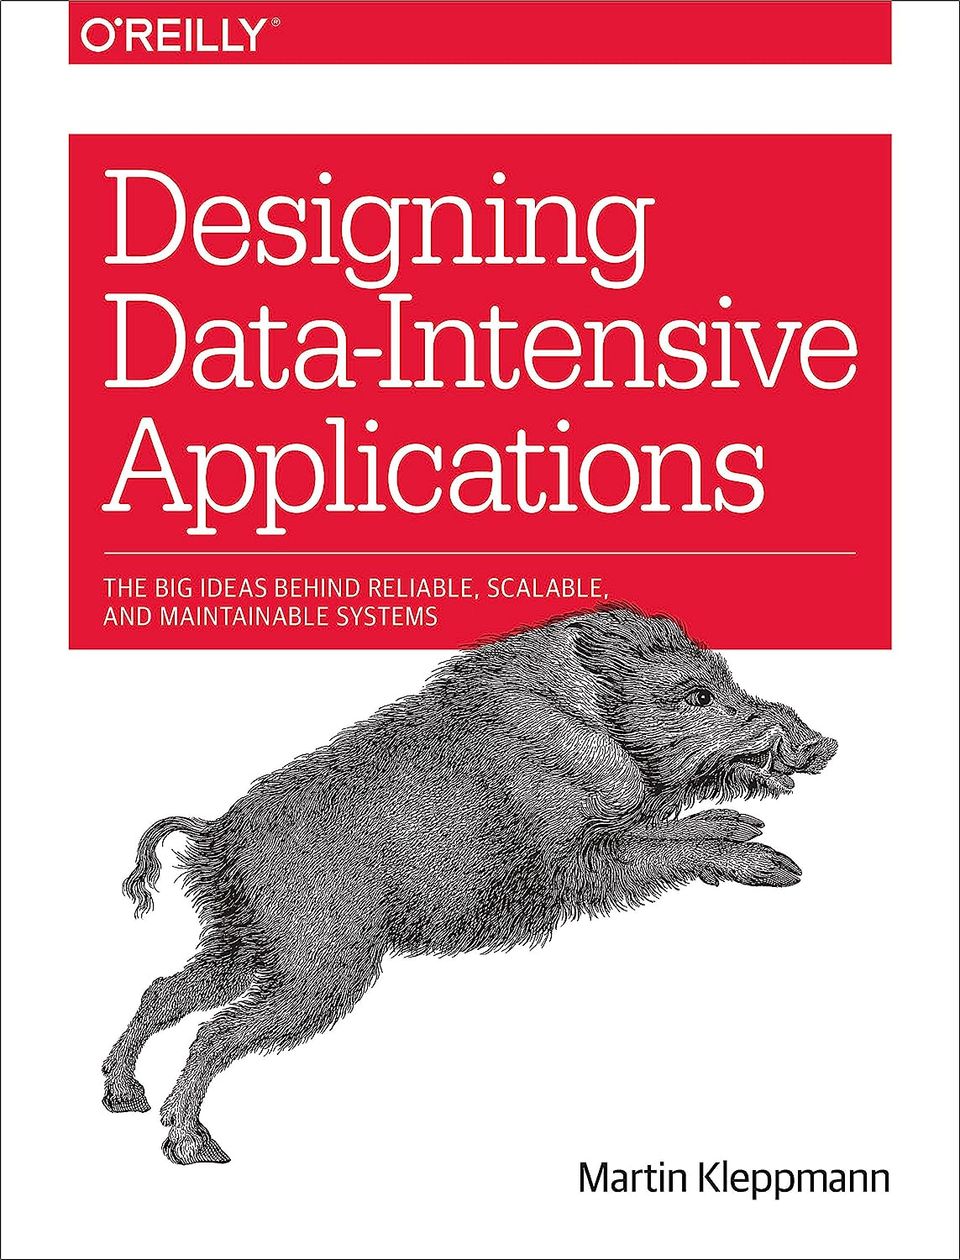 Book Summary: Designing Data-Intensive Applications